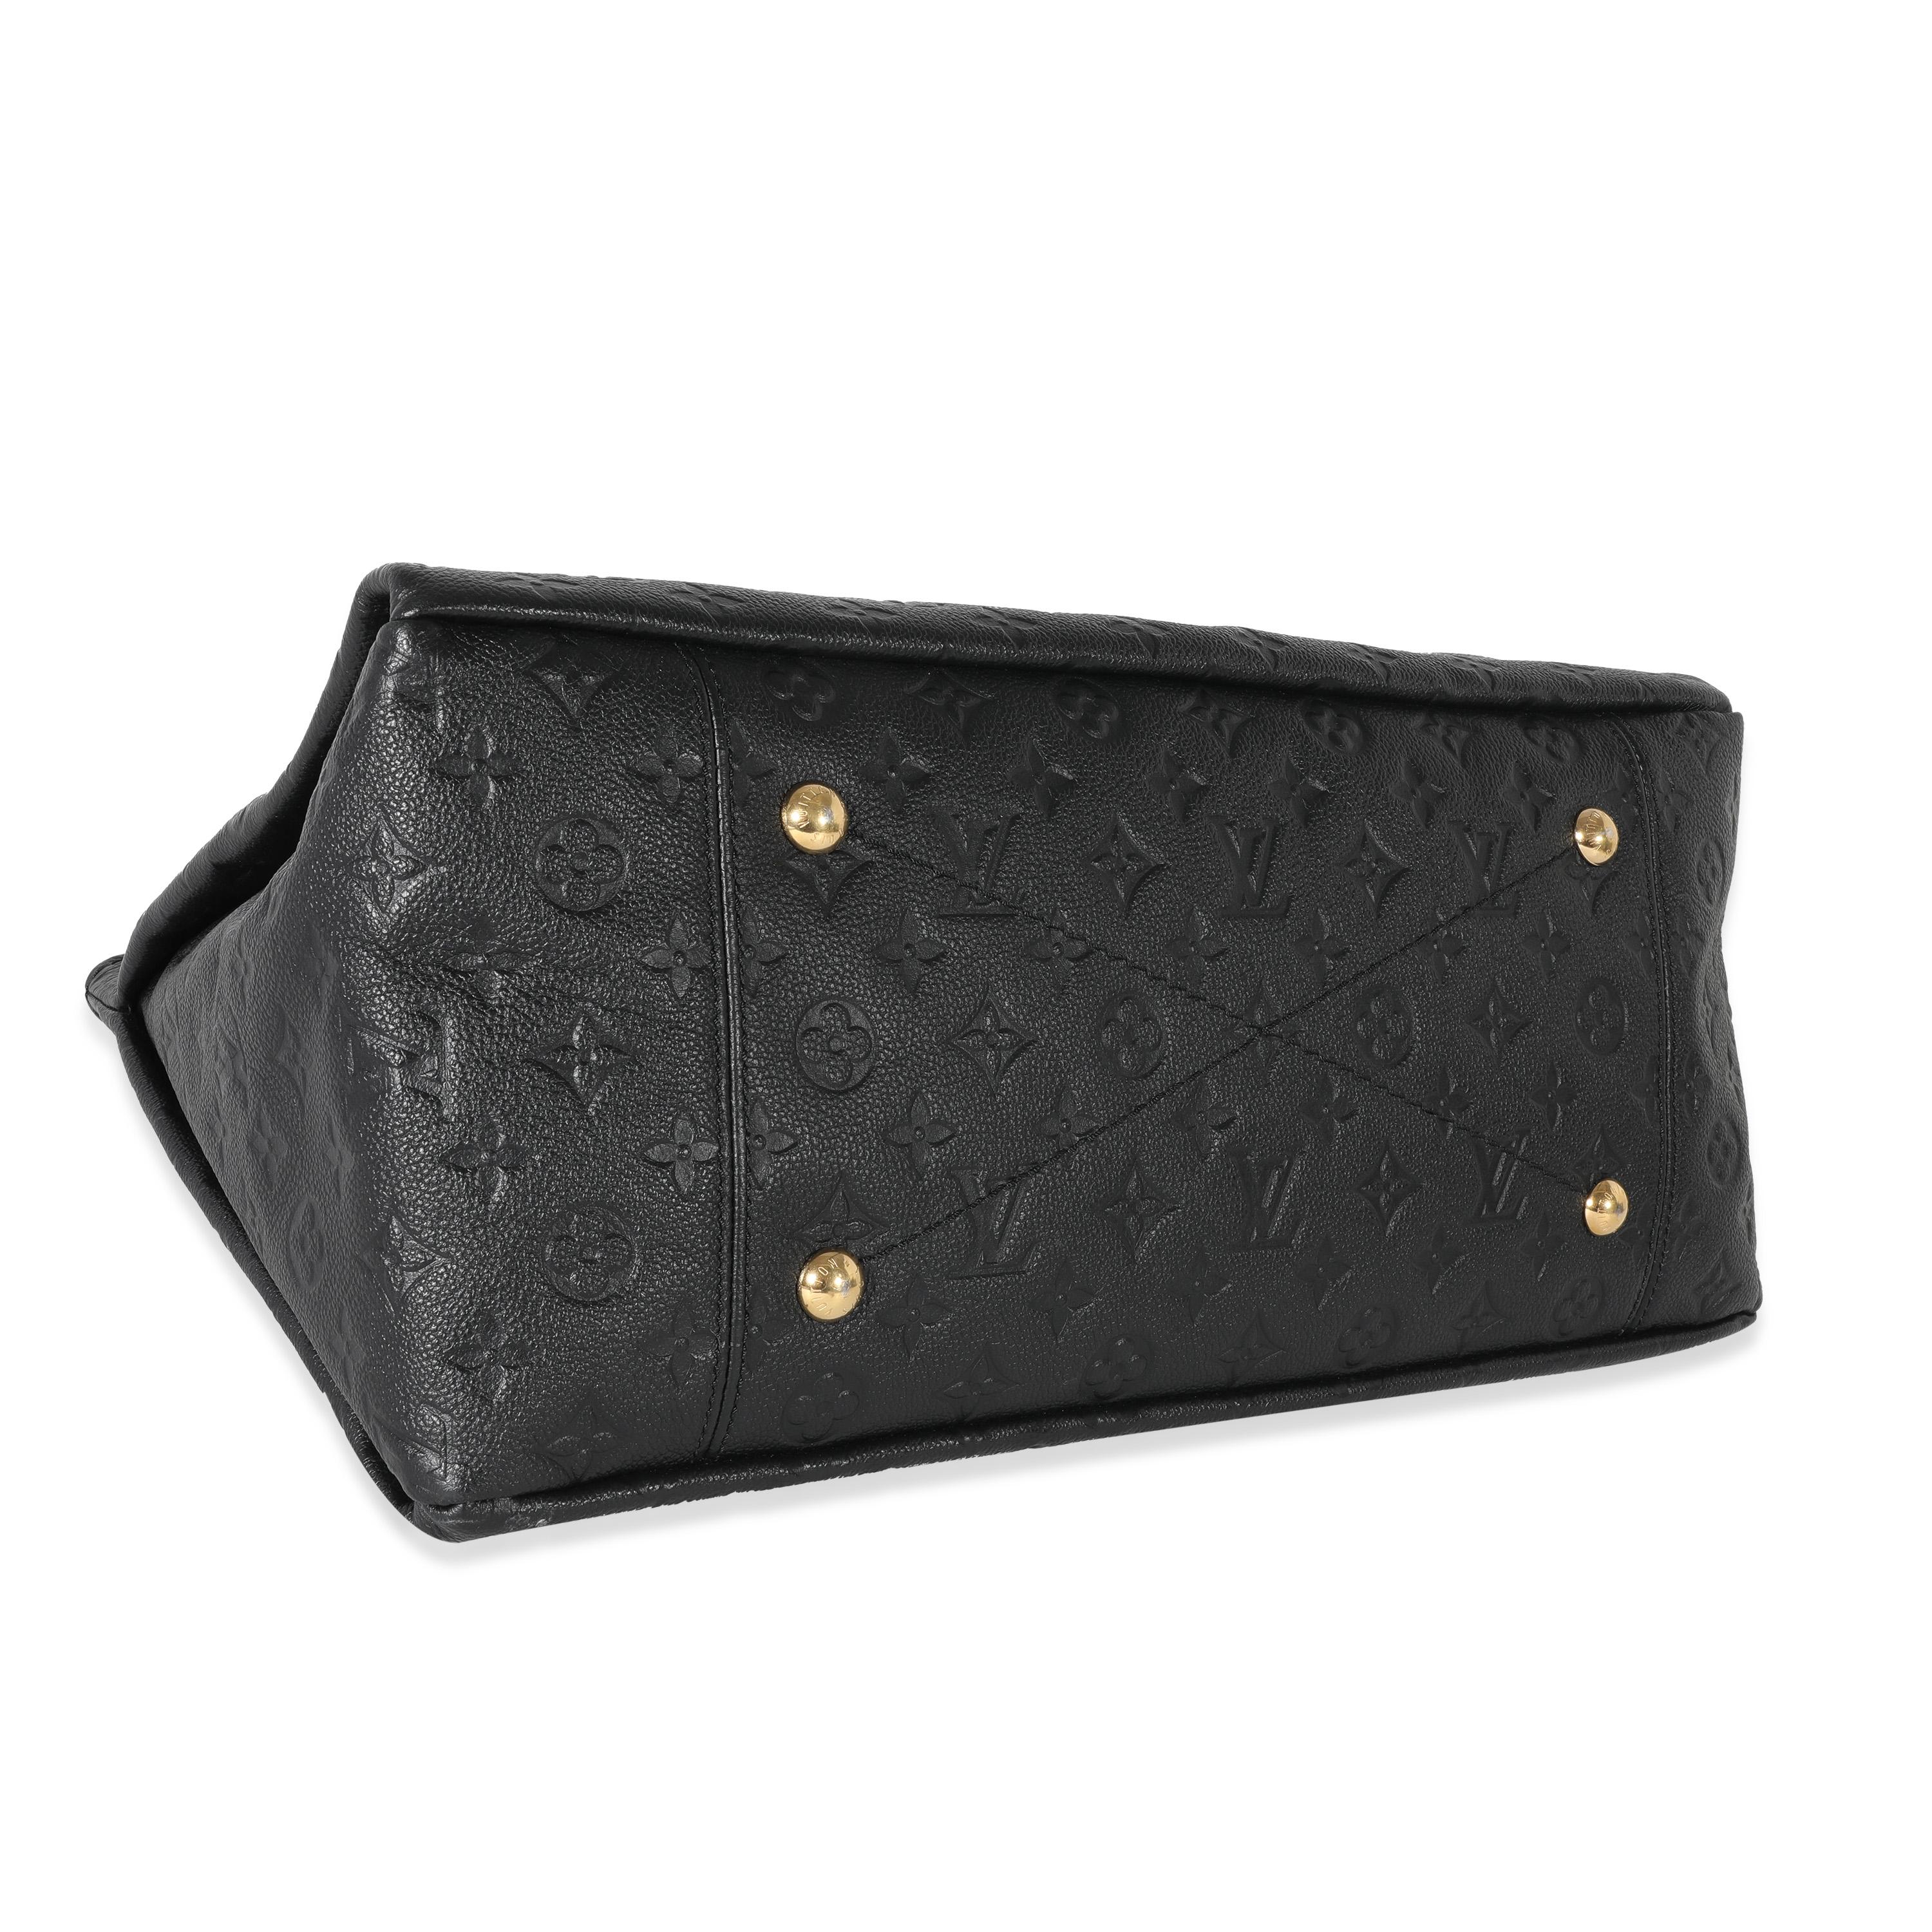 Listing Title: Louis Vuitton Black Monogram Empreinte Artsy MM
SKU: 131408
Condition: Pre-owned 
Handbag Condition: Very Good
Condition Comments: Item is in very good condition with minor signs of wear. Scuffing along corners and exterior leather.